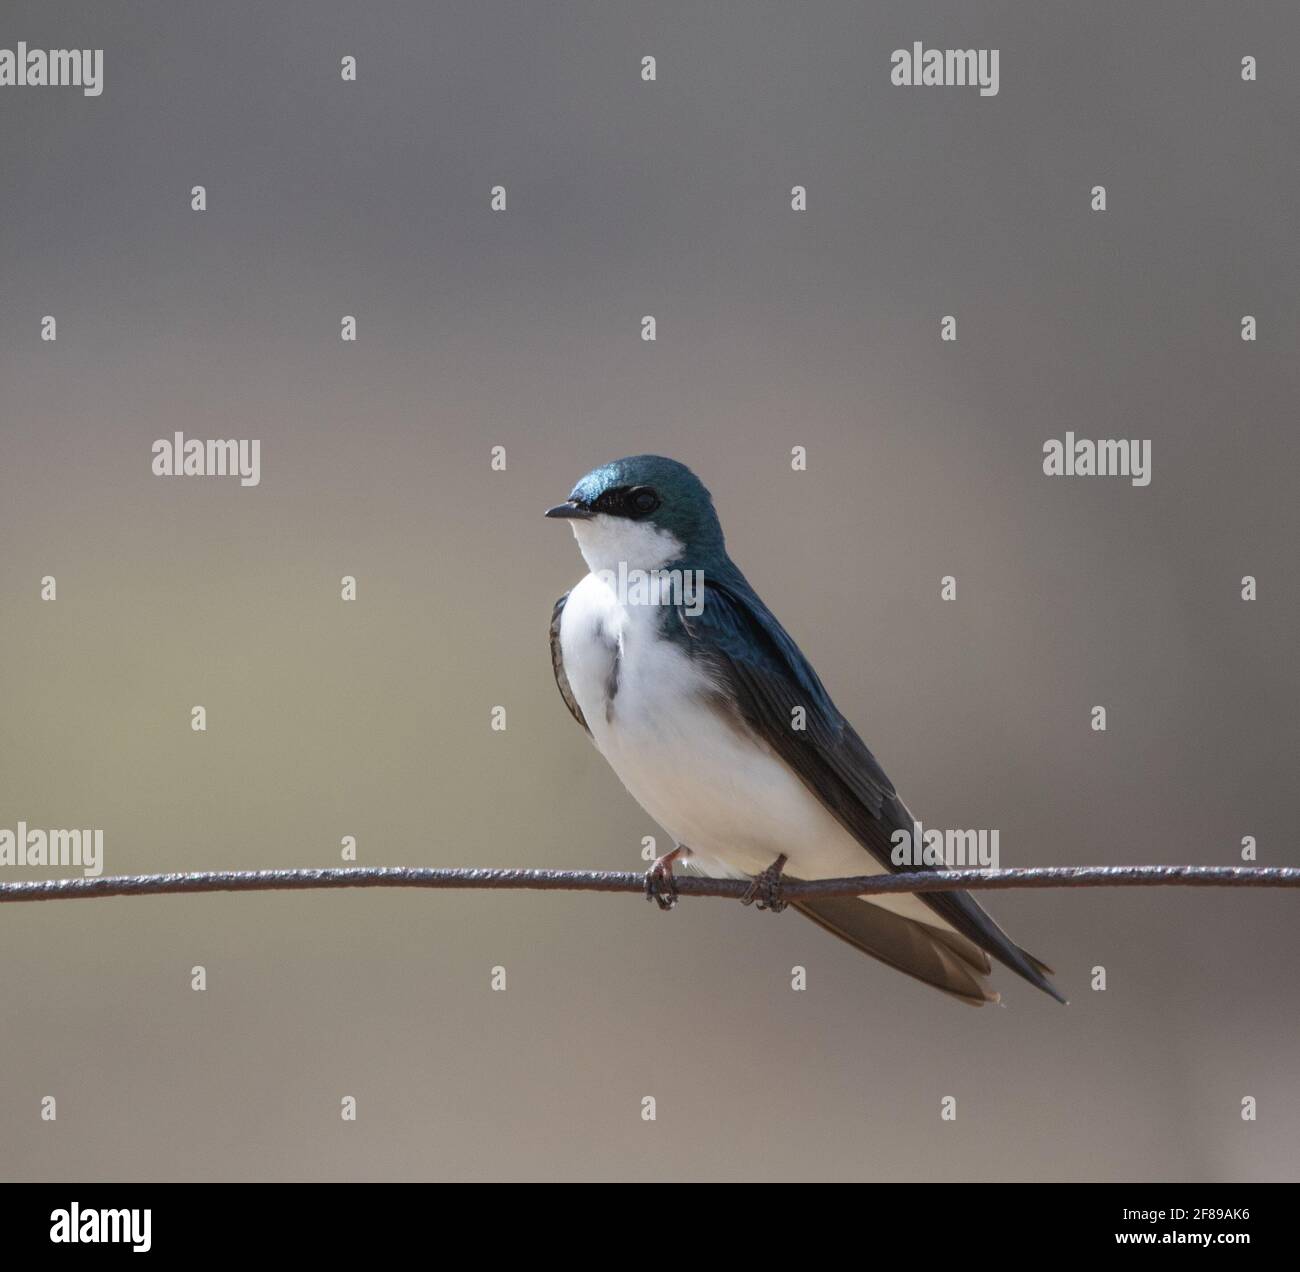 A Tree Swallow (Tachycineta bicolor) perched on a wire fence Stock Photo